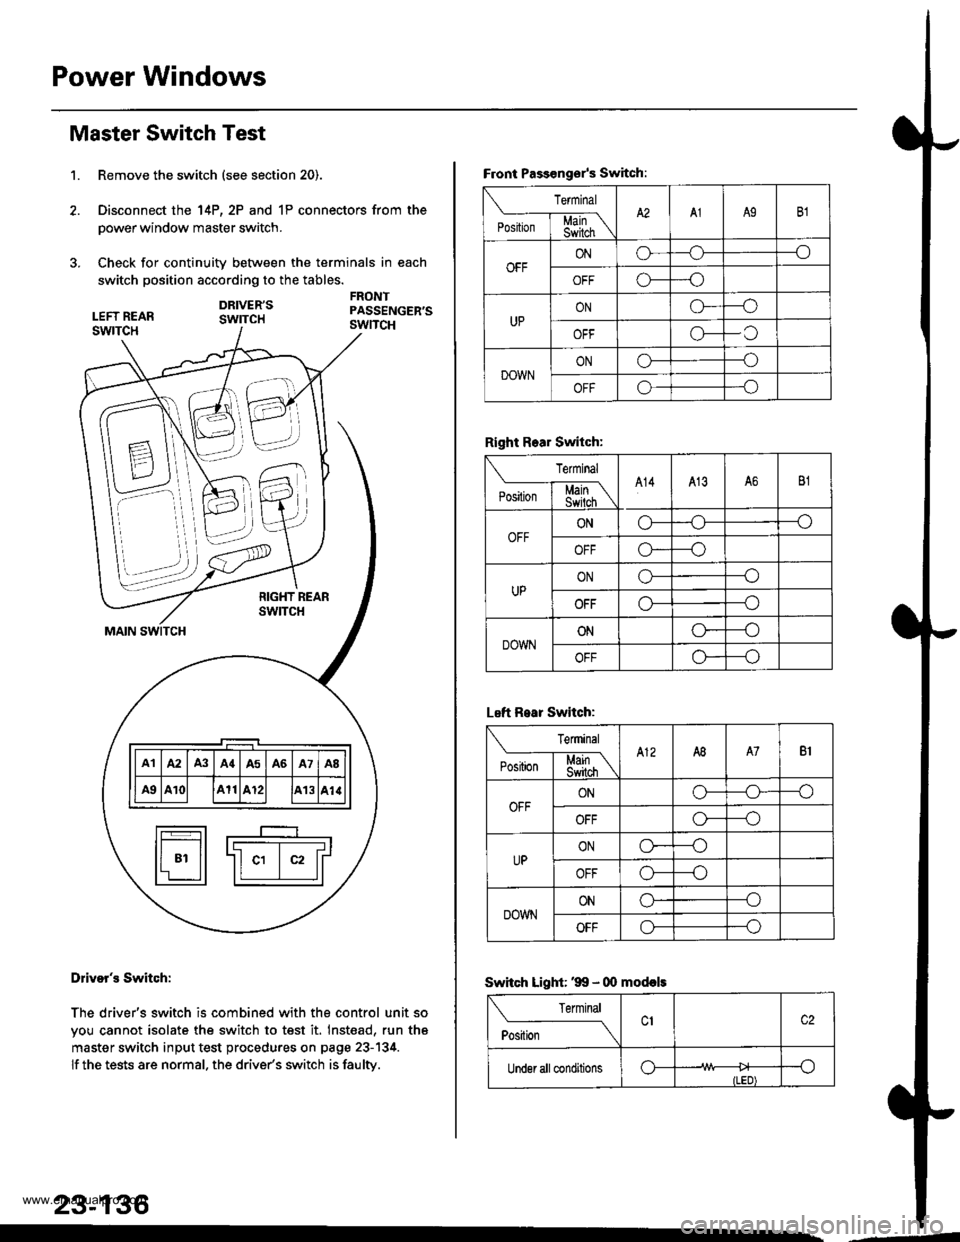 HONDA CR-V 2000 RD1-RD3 / 1.G Workshop Manual 
Power Windows
1.
Master Switch Test
Remove the switch (see section 20).
Disconnect the 14P, 2P and 1P connectors from the
power window master switch.
Check for continuity between the terminals in eac